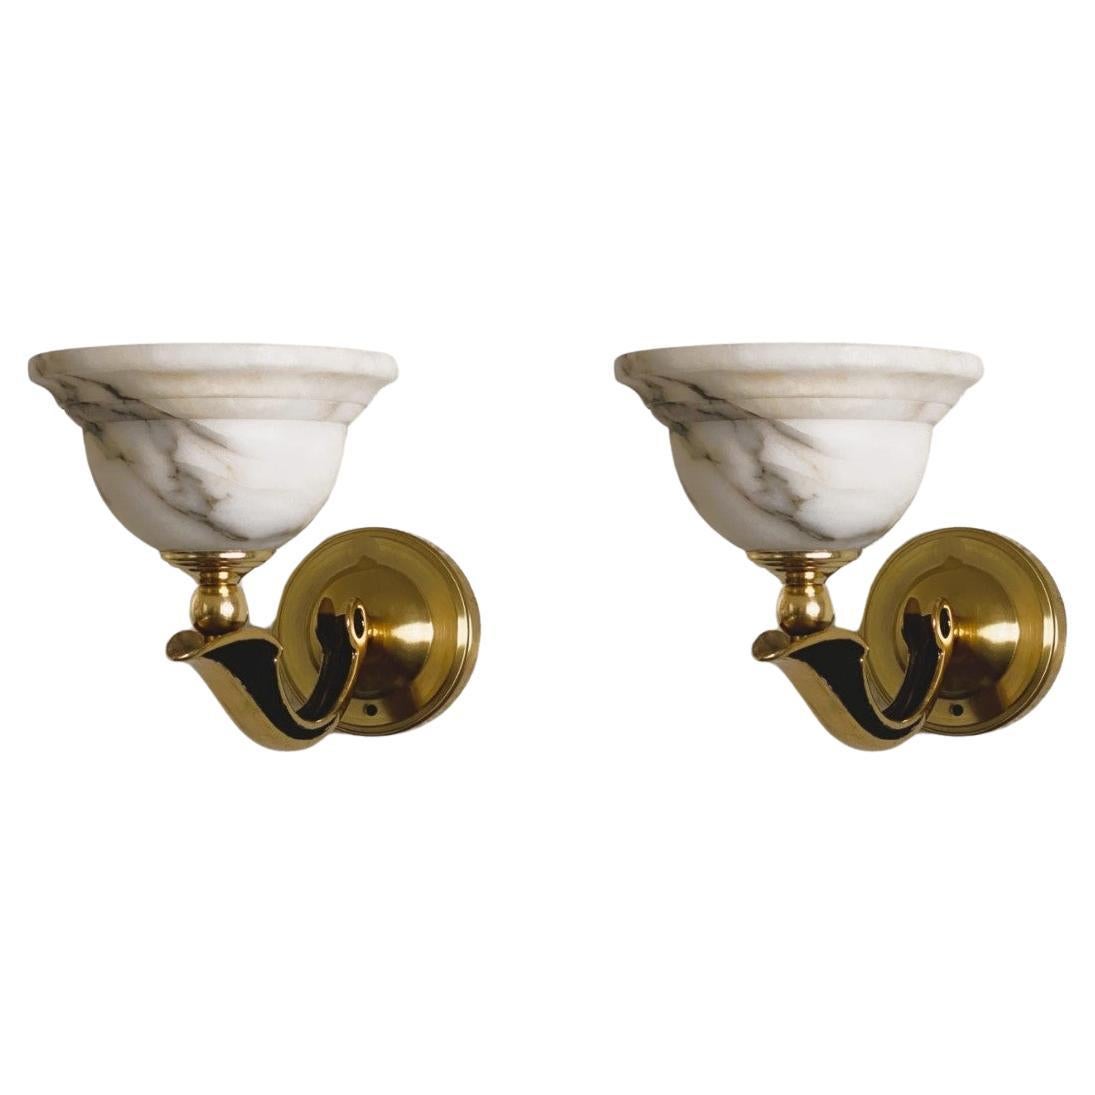 Pair of French Art Deco Alabaster Brass Wall Sconces, 1930s